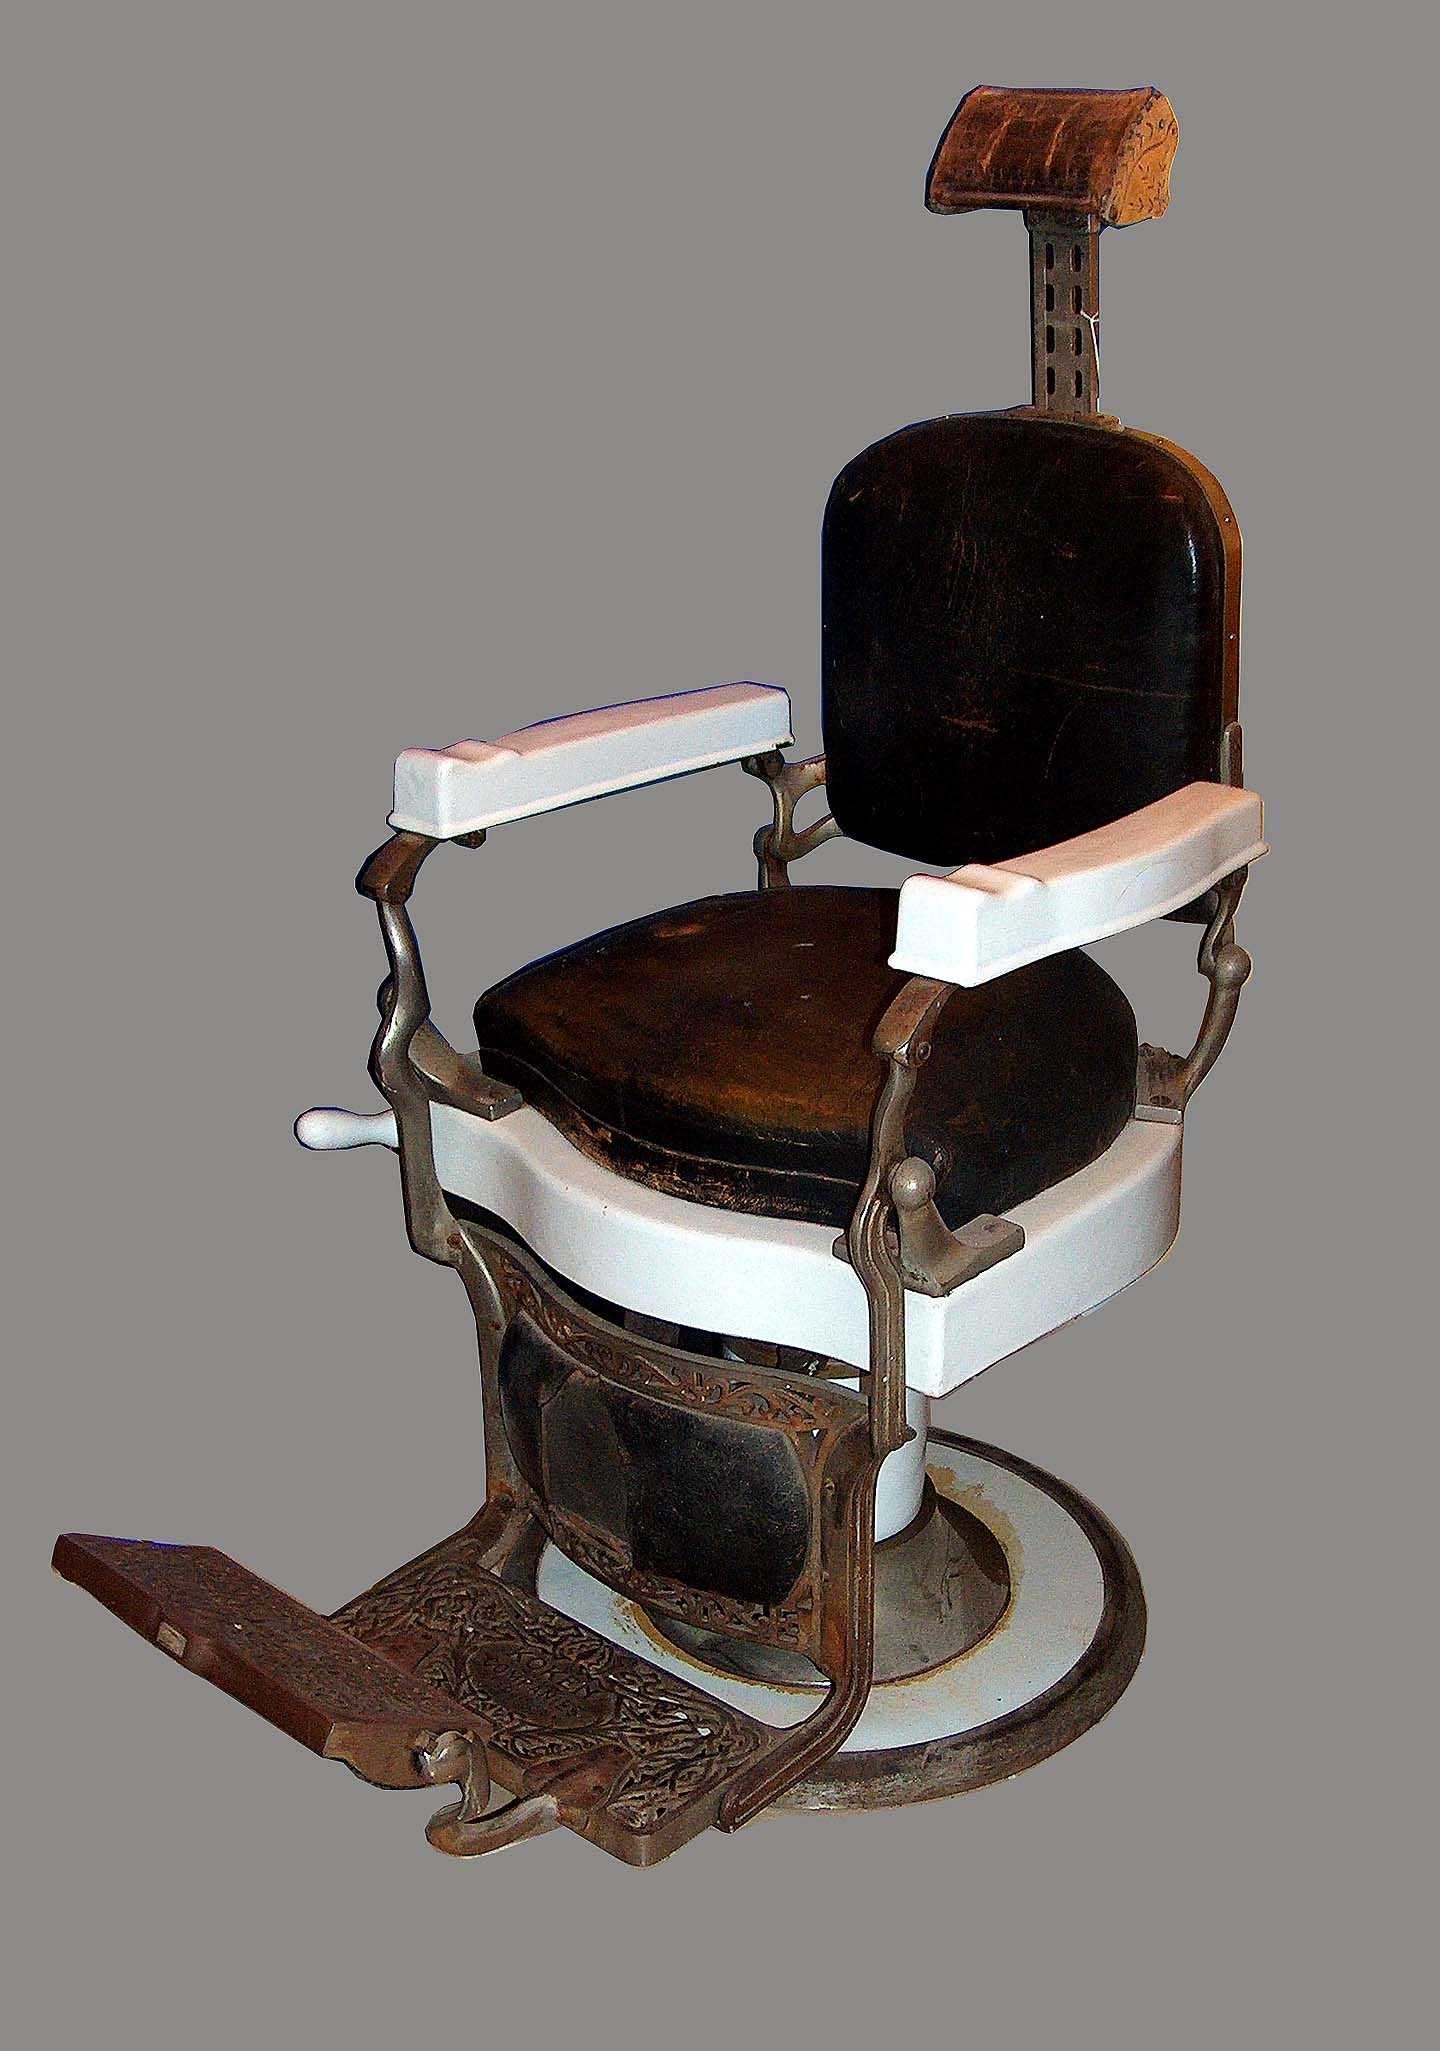 Barber chair image classifcation dataset for machine learning